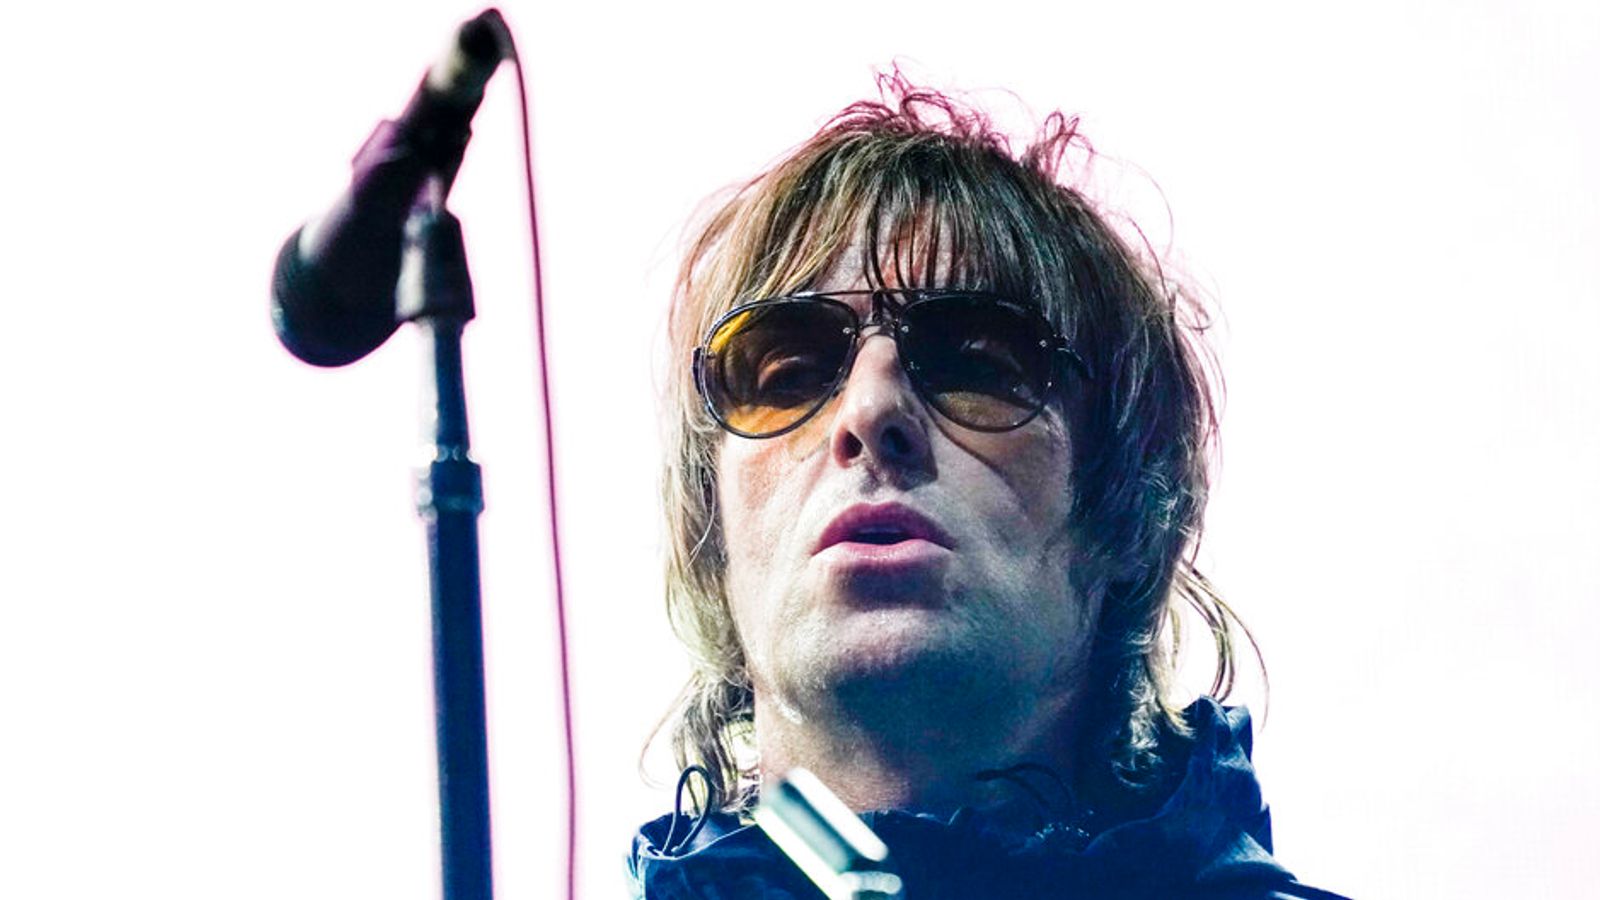 Liam Gallagher opens up about men's mental health as new single Too Good For Giving Up is released to support charity campaign